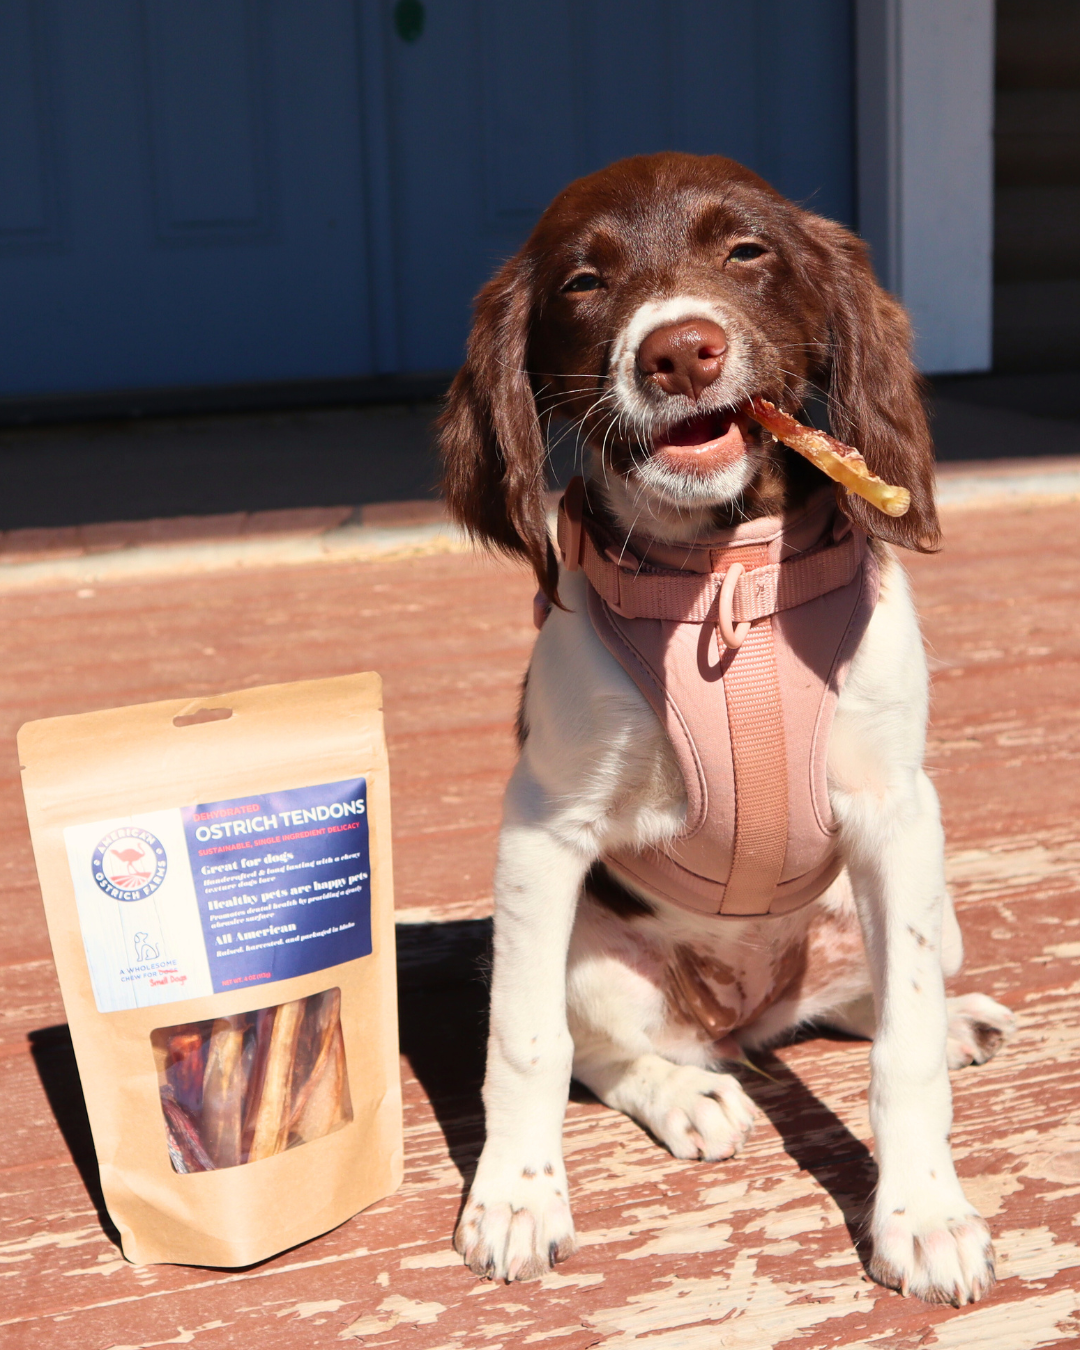 american ostrich farms pet treats, dog with ostrich treat in mouth